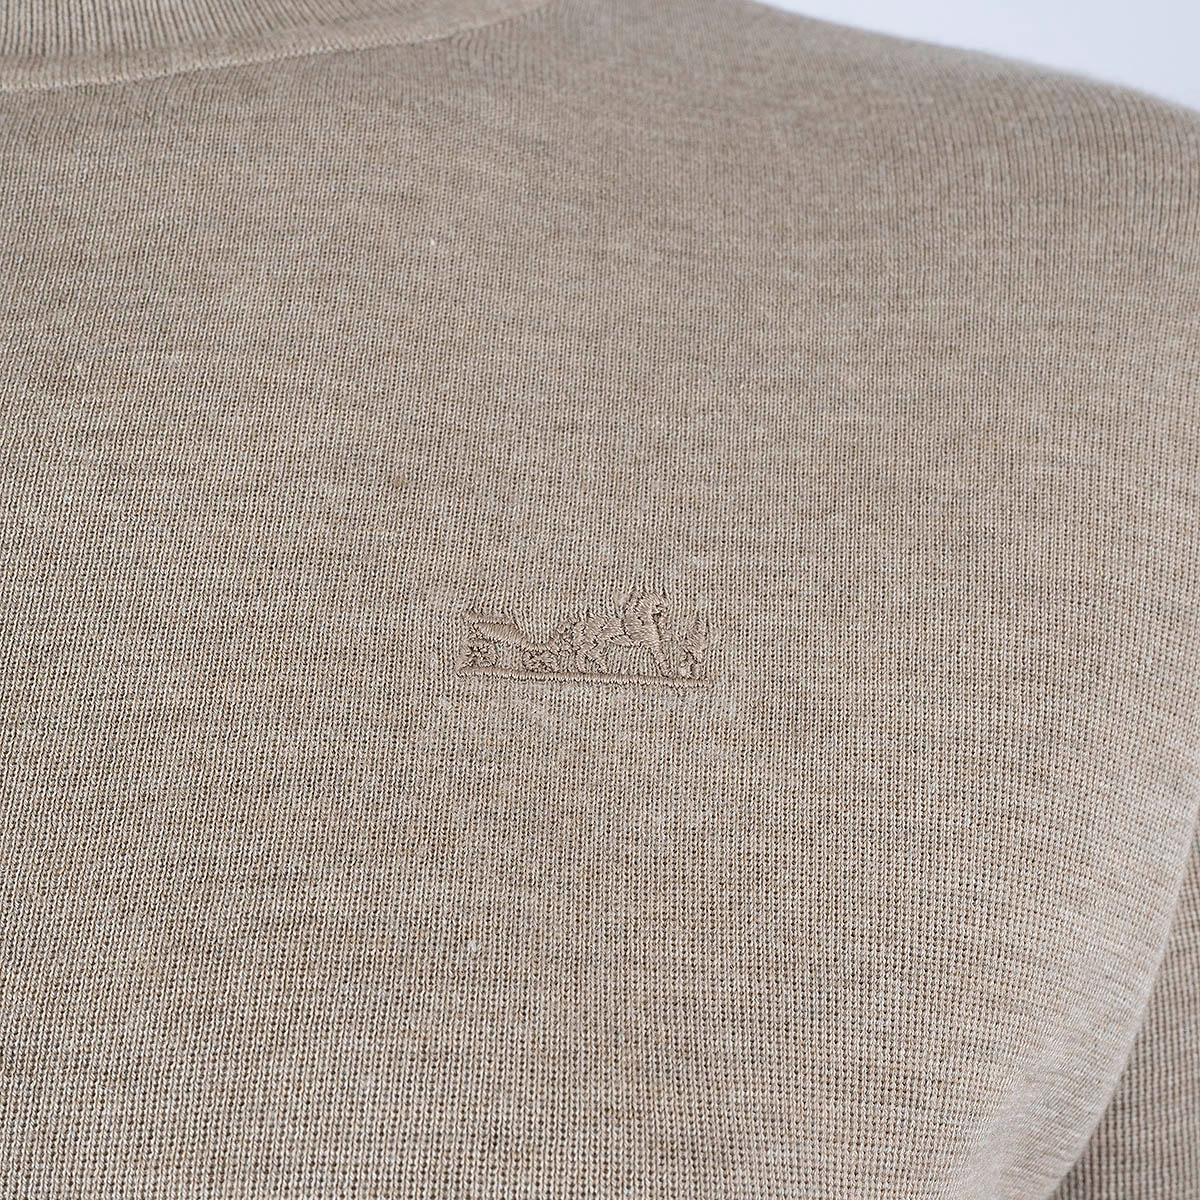 HERMES taupe cashmere & silk 2020 LOGO MOCK NECK Sweater 36 XS 2